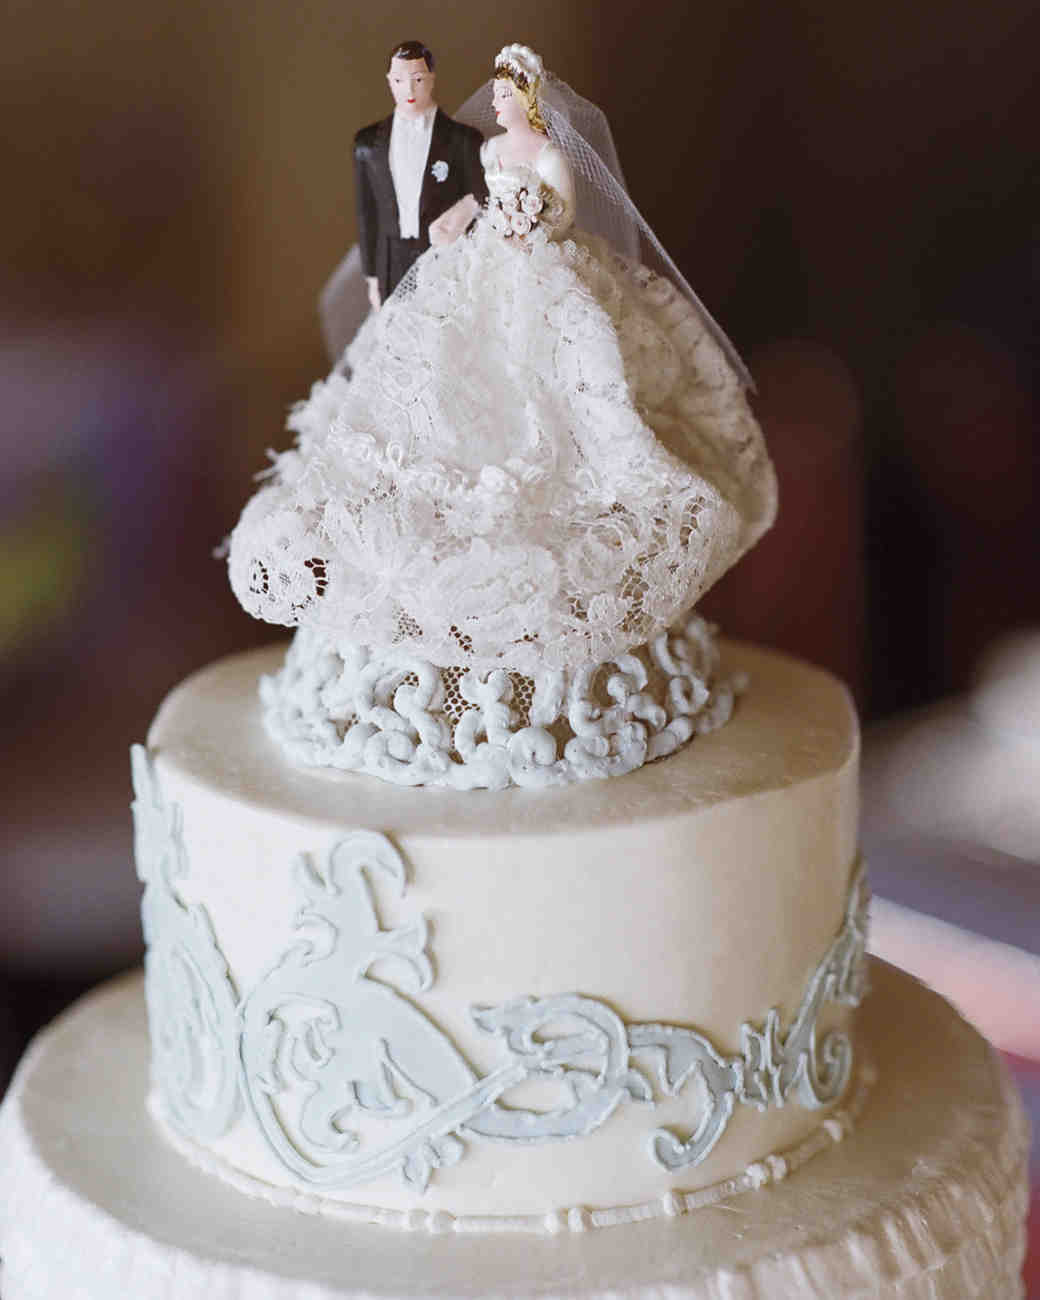 Cake Toppers For Weddings
 36 of the Best Wedding Cake Toppers